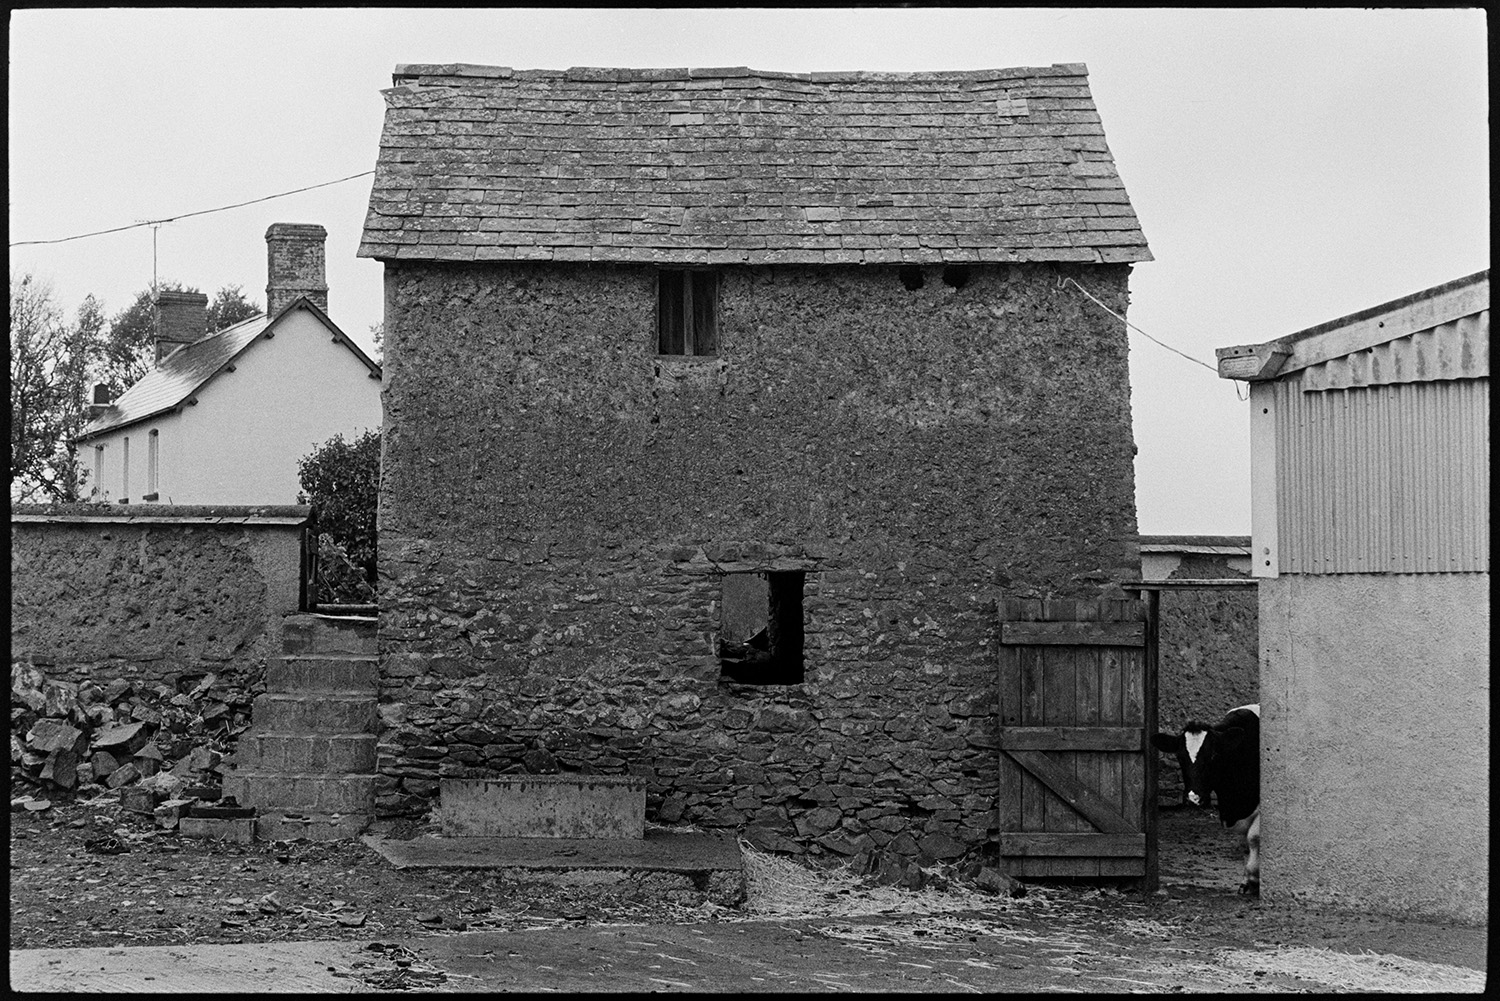 Cows in yard with cob barn. 
[A cow walking into the farmyard at Parsonage, Iddesleigh, by a stone, cob and tiled barn.]